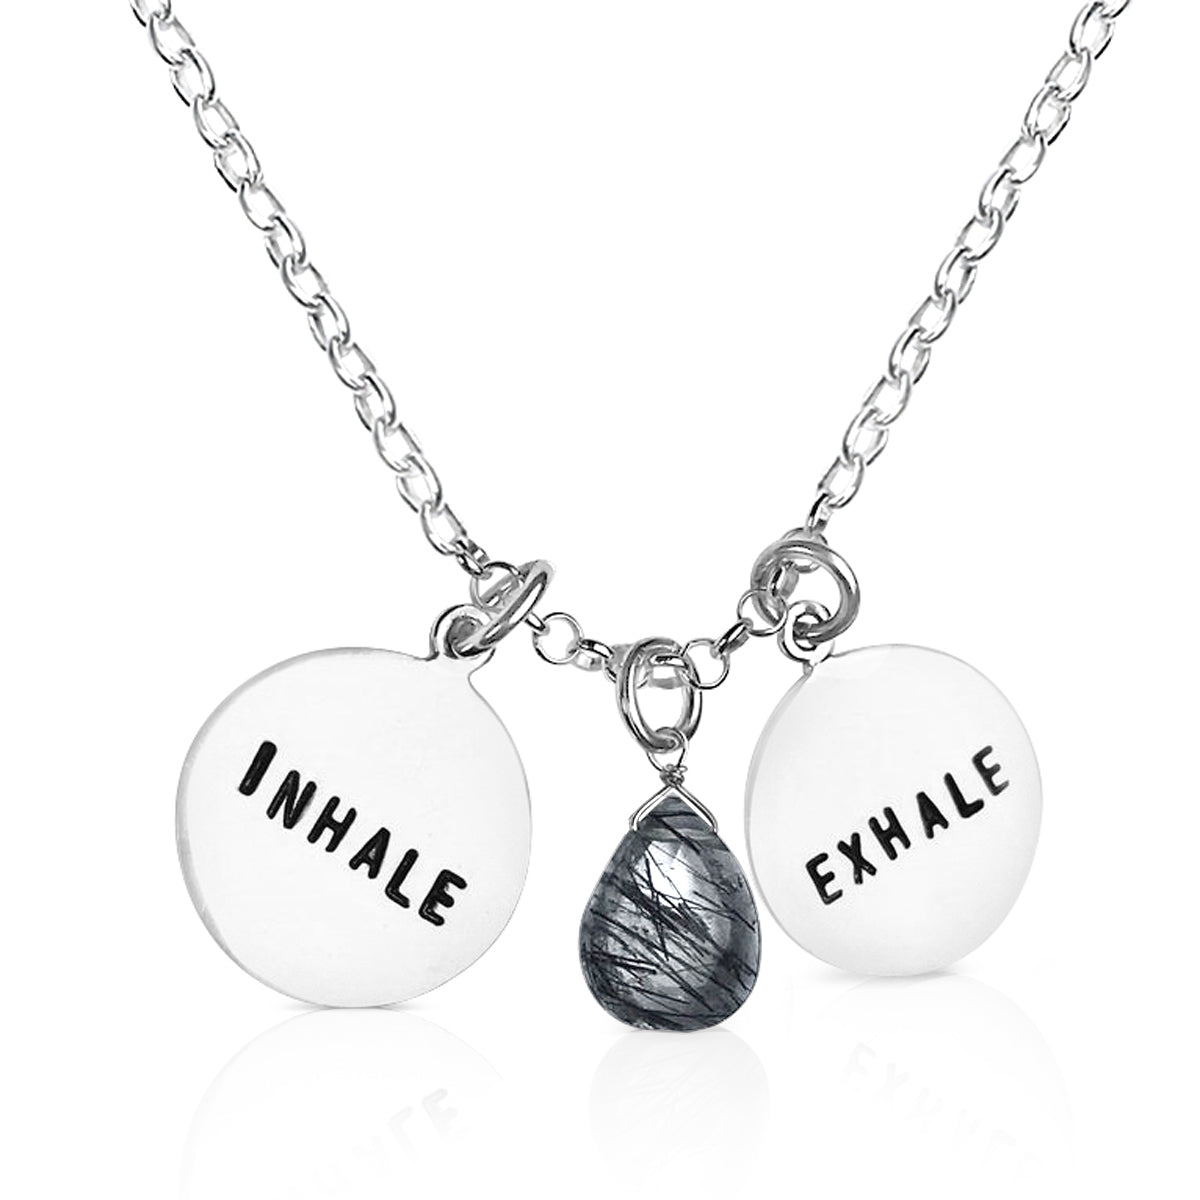 Sterling Silver Inhale - Exhale Necklace with Rutilated Quartz for Self-Discovery